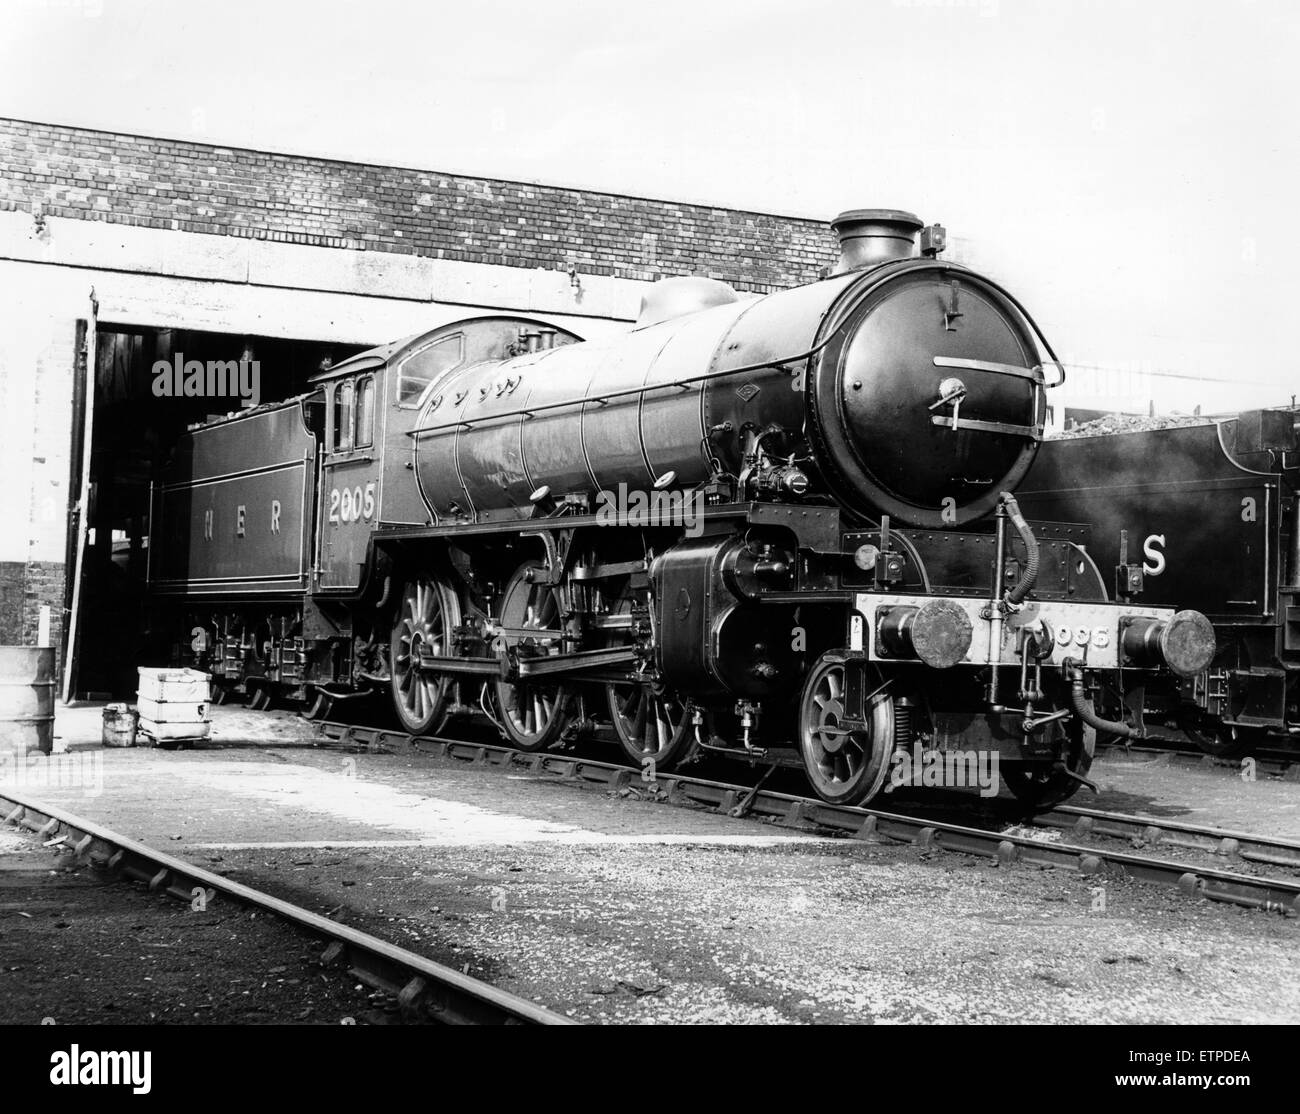 LNER Class K1 Number 2005 steam locomotive designed by Edward Thompson. Pictured at ICI Preservation Works. North Yorkshire, 24th December 1984. Stock Photo